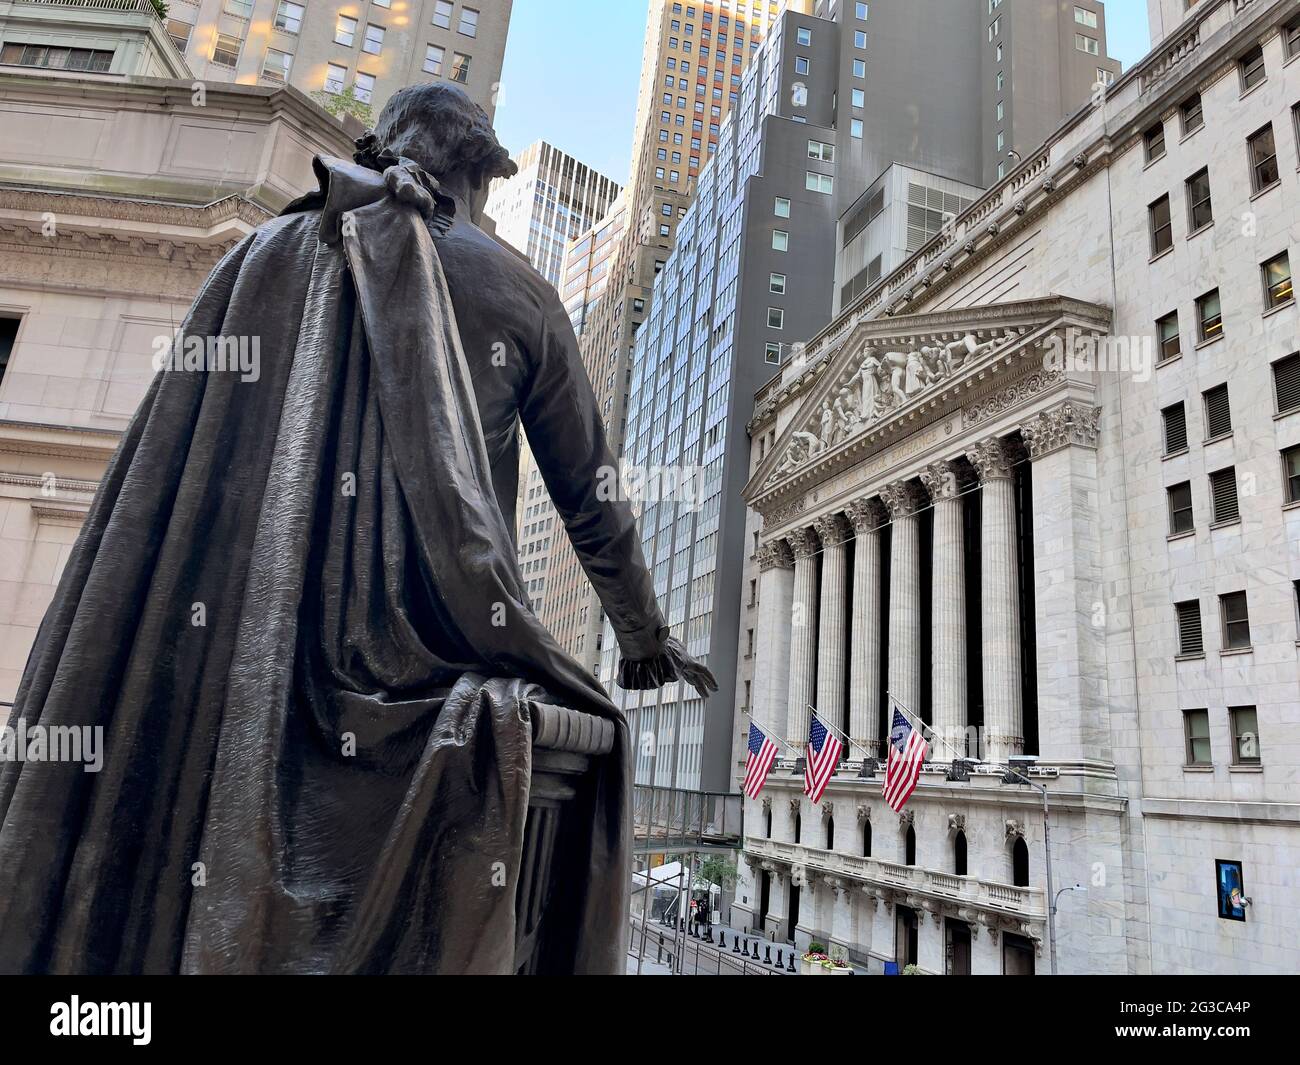 Statue of George Washington at Federal Hall & New York Stock Exchange building facade in the background. Stock Photo